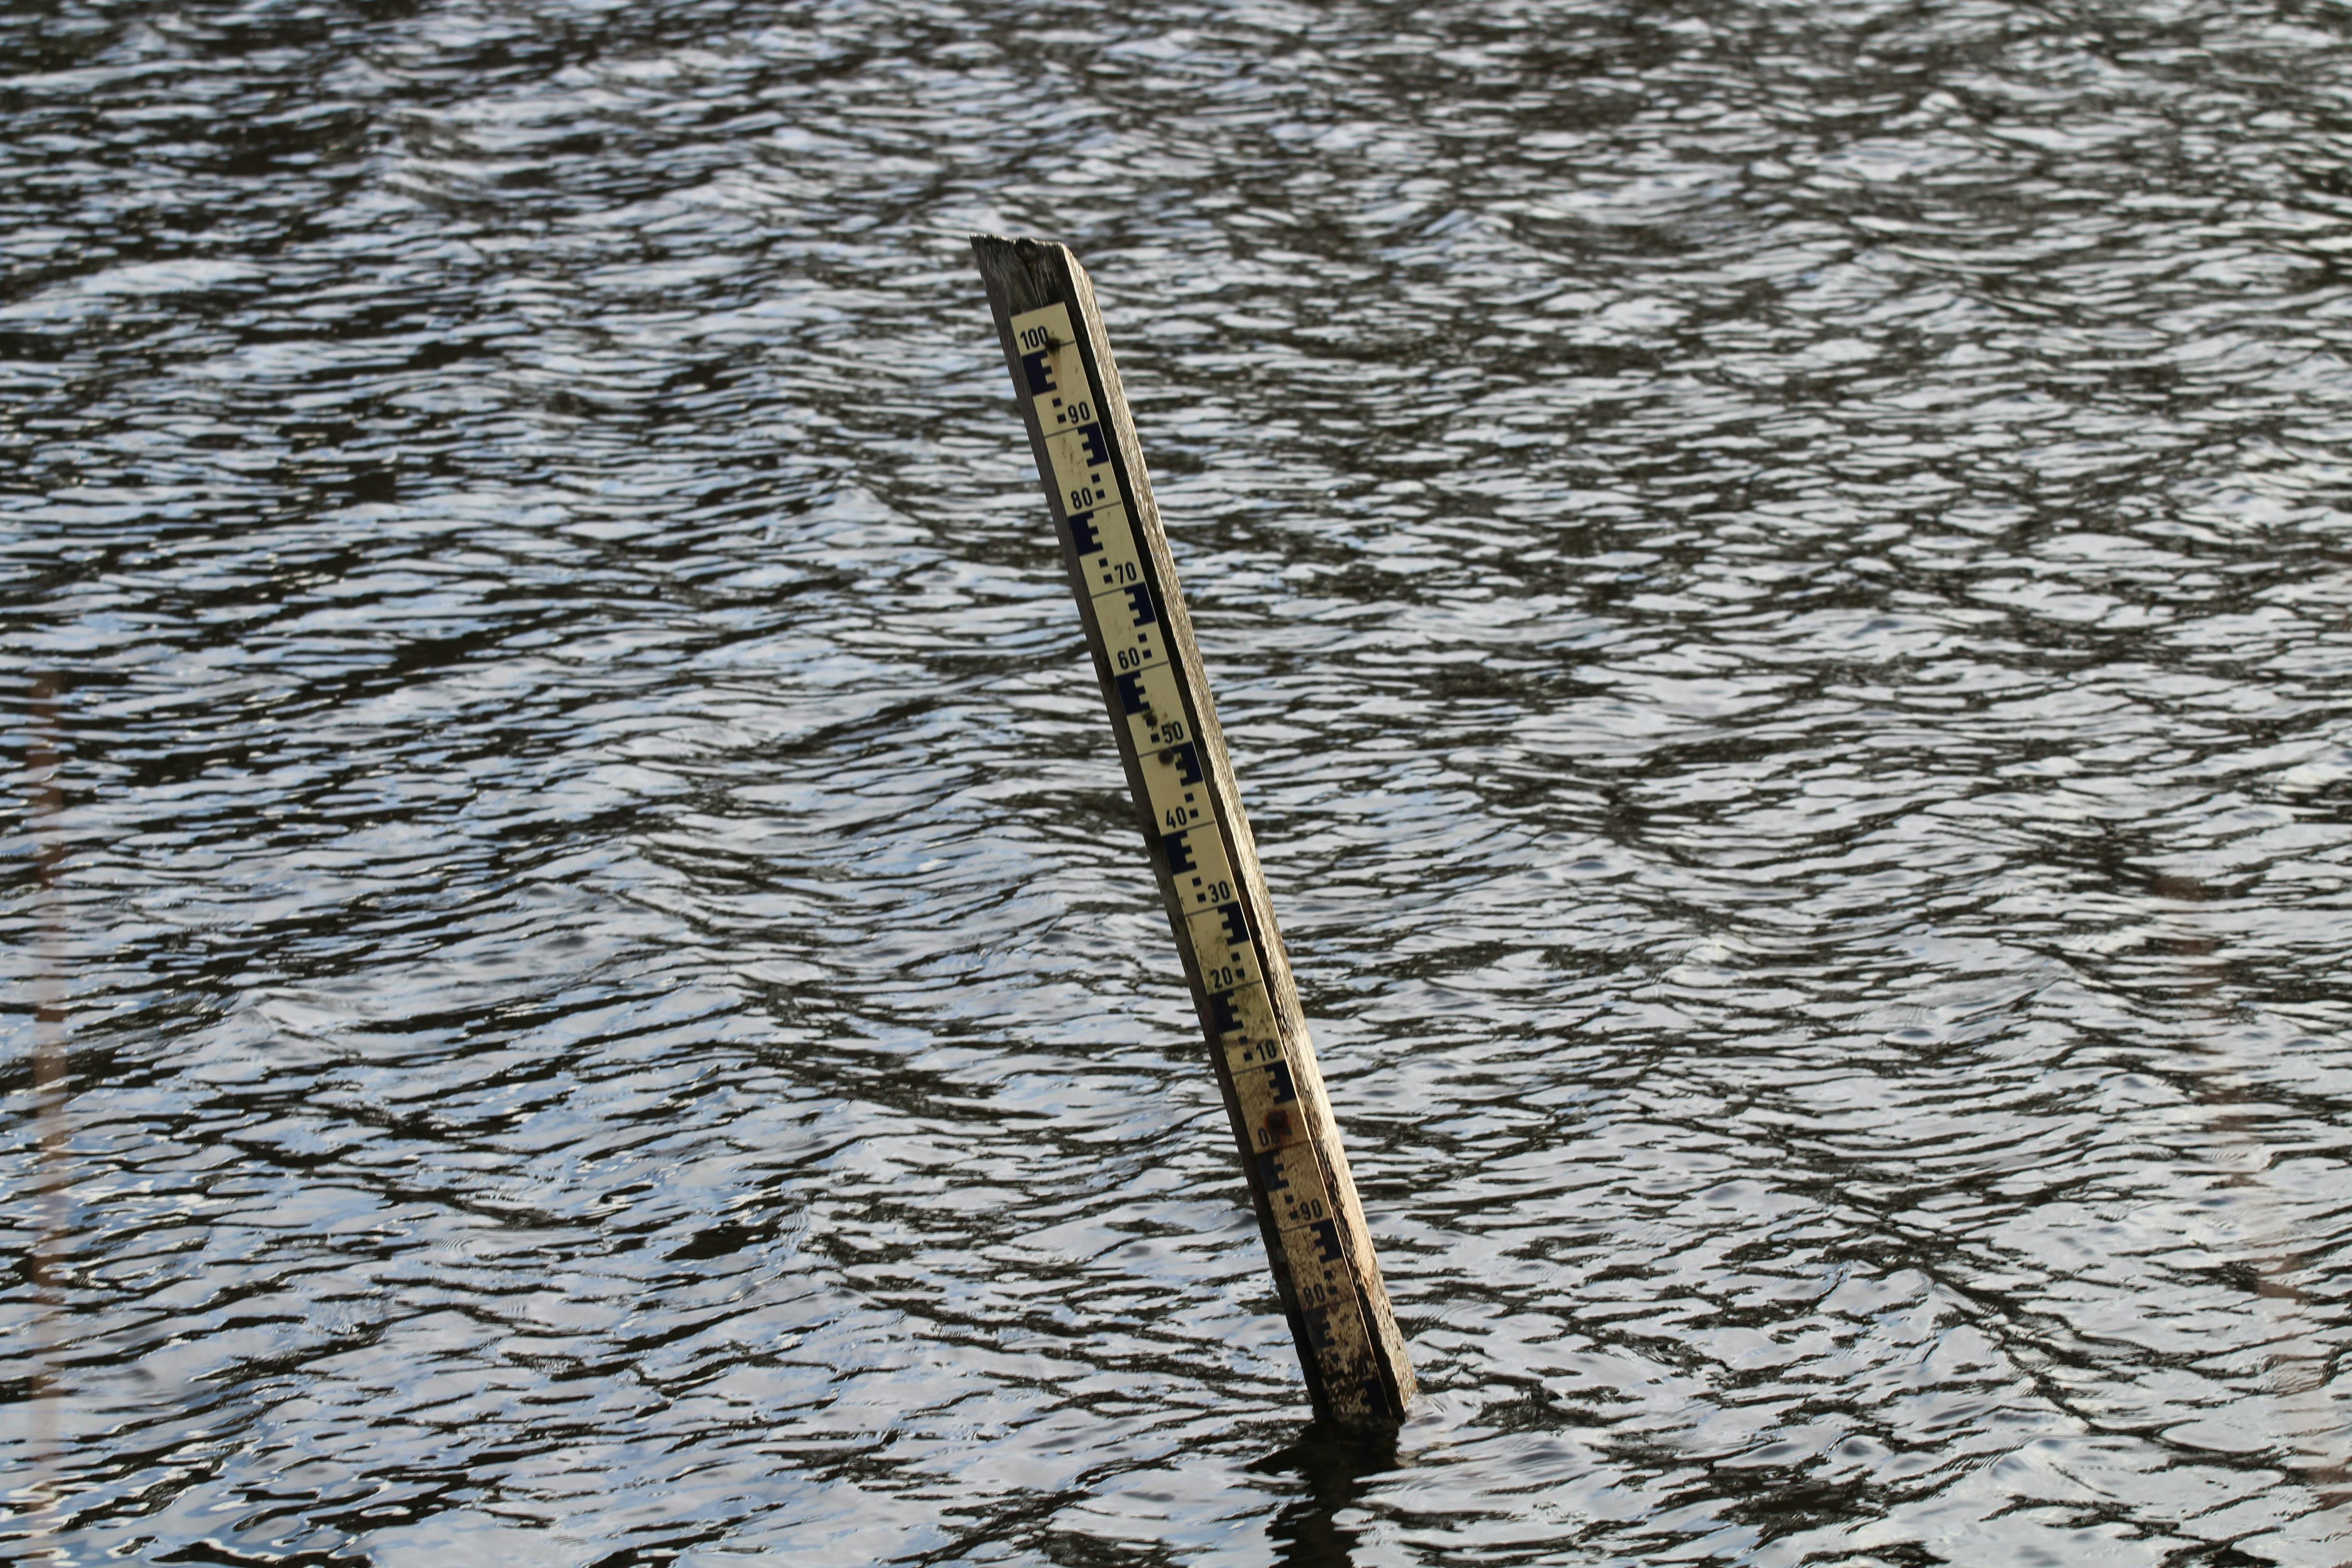 Free stock photo of measuring post in the water